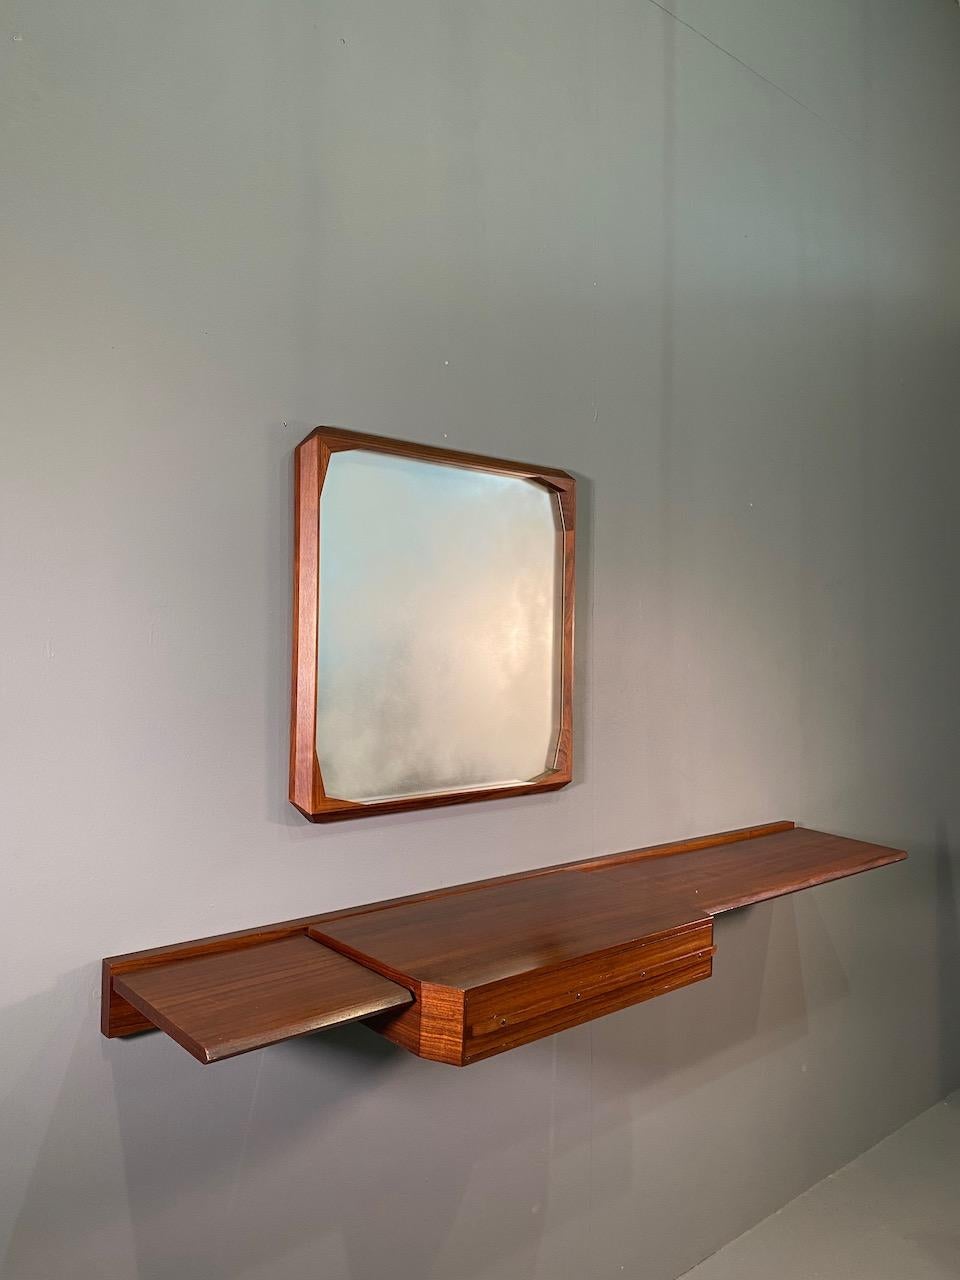 Wall console and mirror by Tredici of Pavia i 1950s, designed by Dino Cavalli.